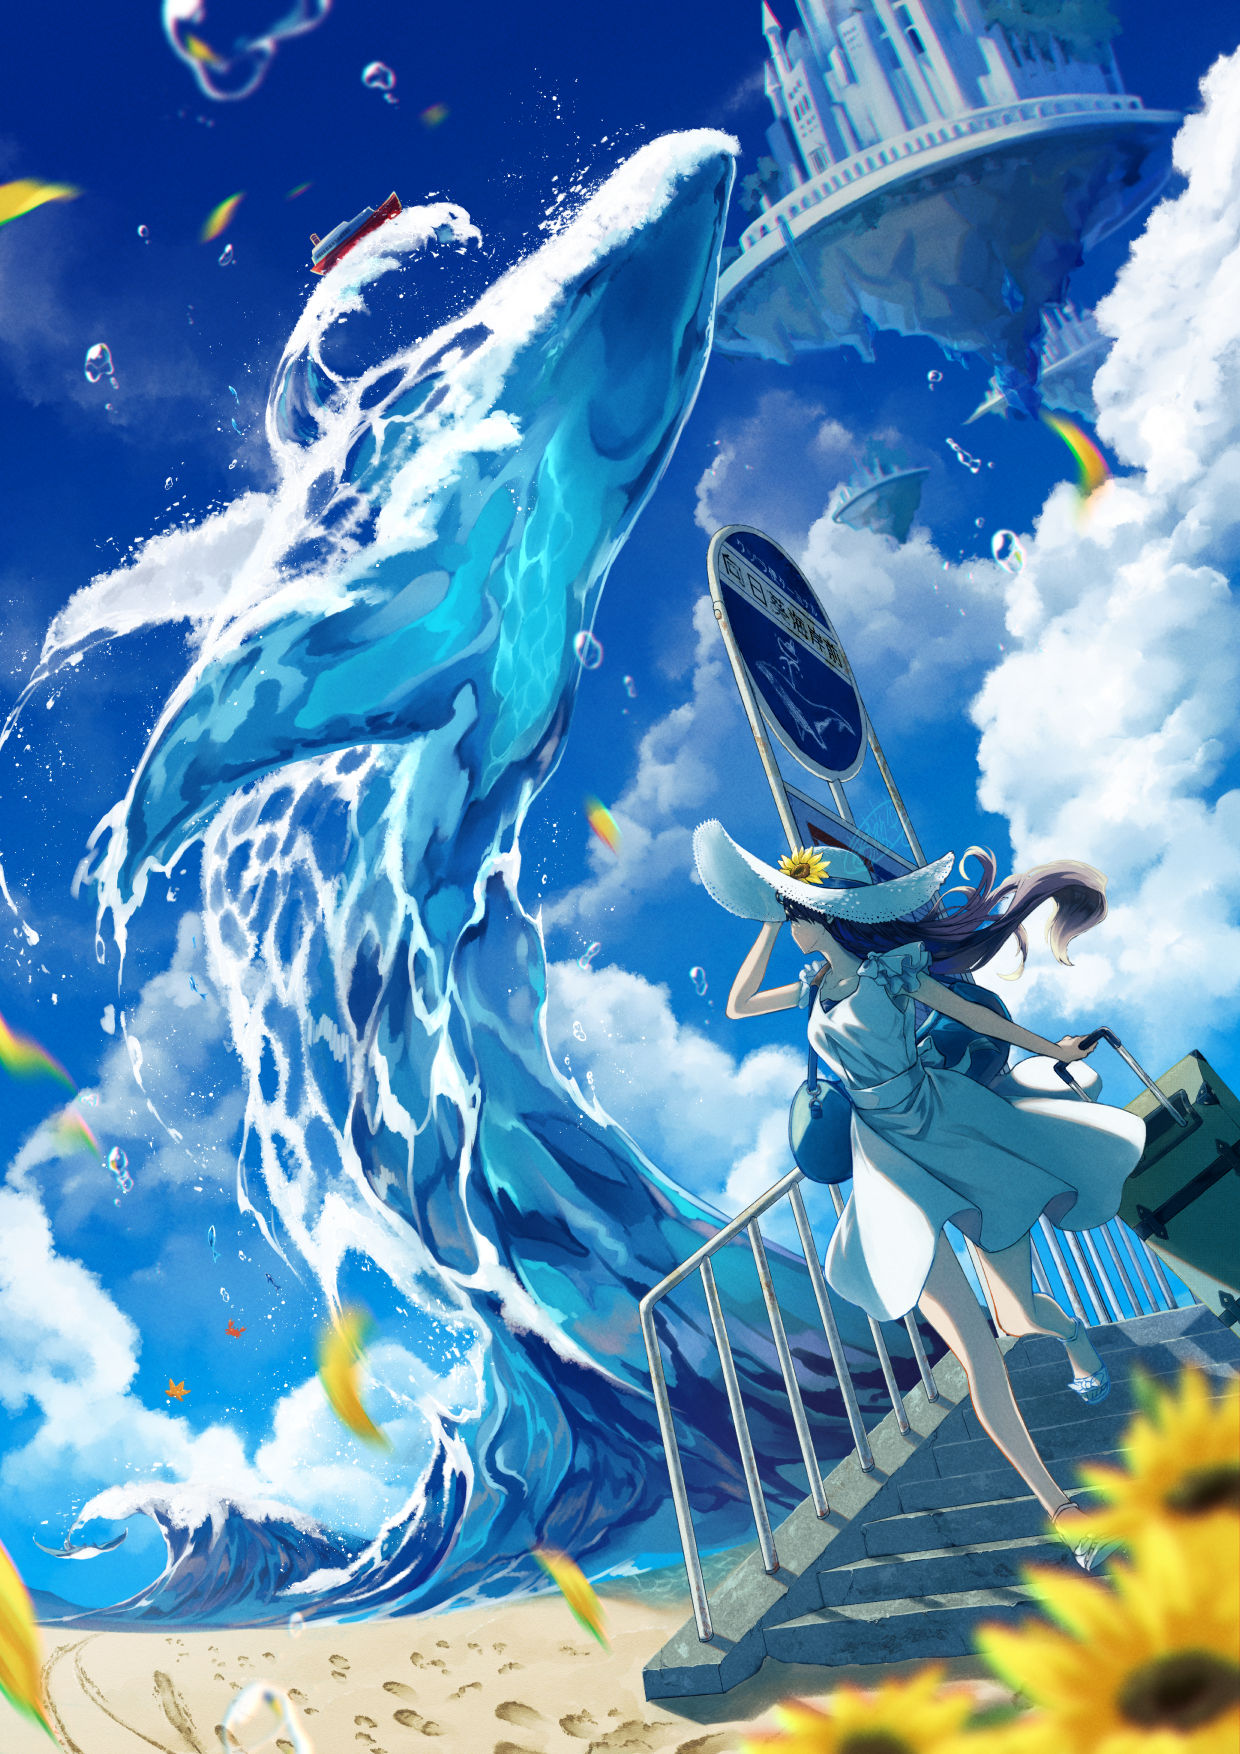 Anime 1240x1754 anime anime girls Pixiv portrait display sun hats whale water sky animals stairs sunflowers leaves water drops sand looking away walking floating